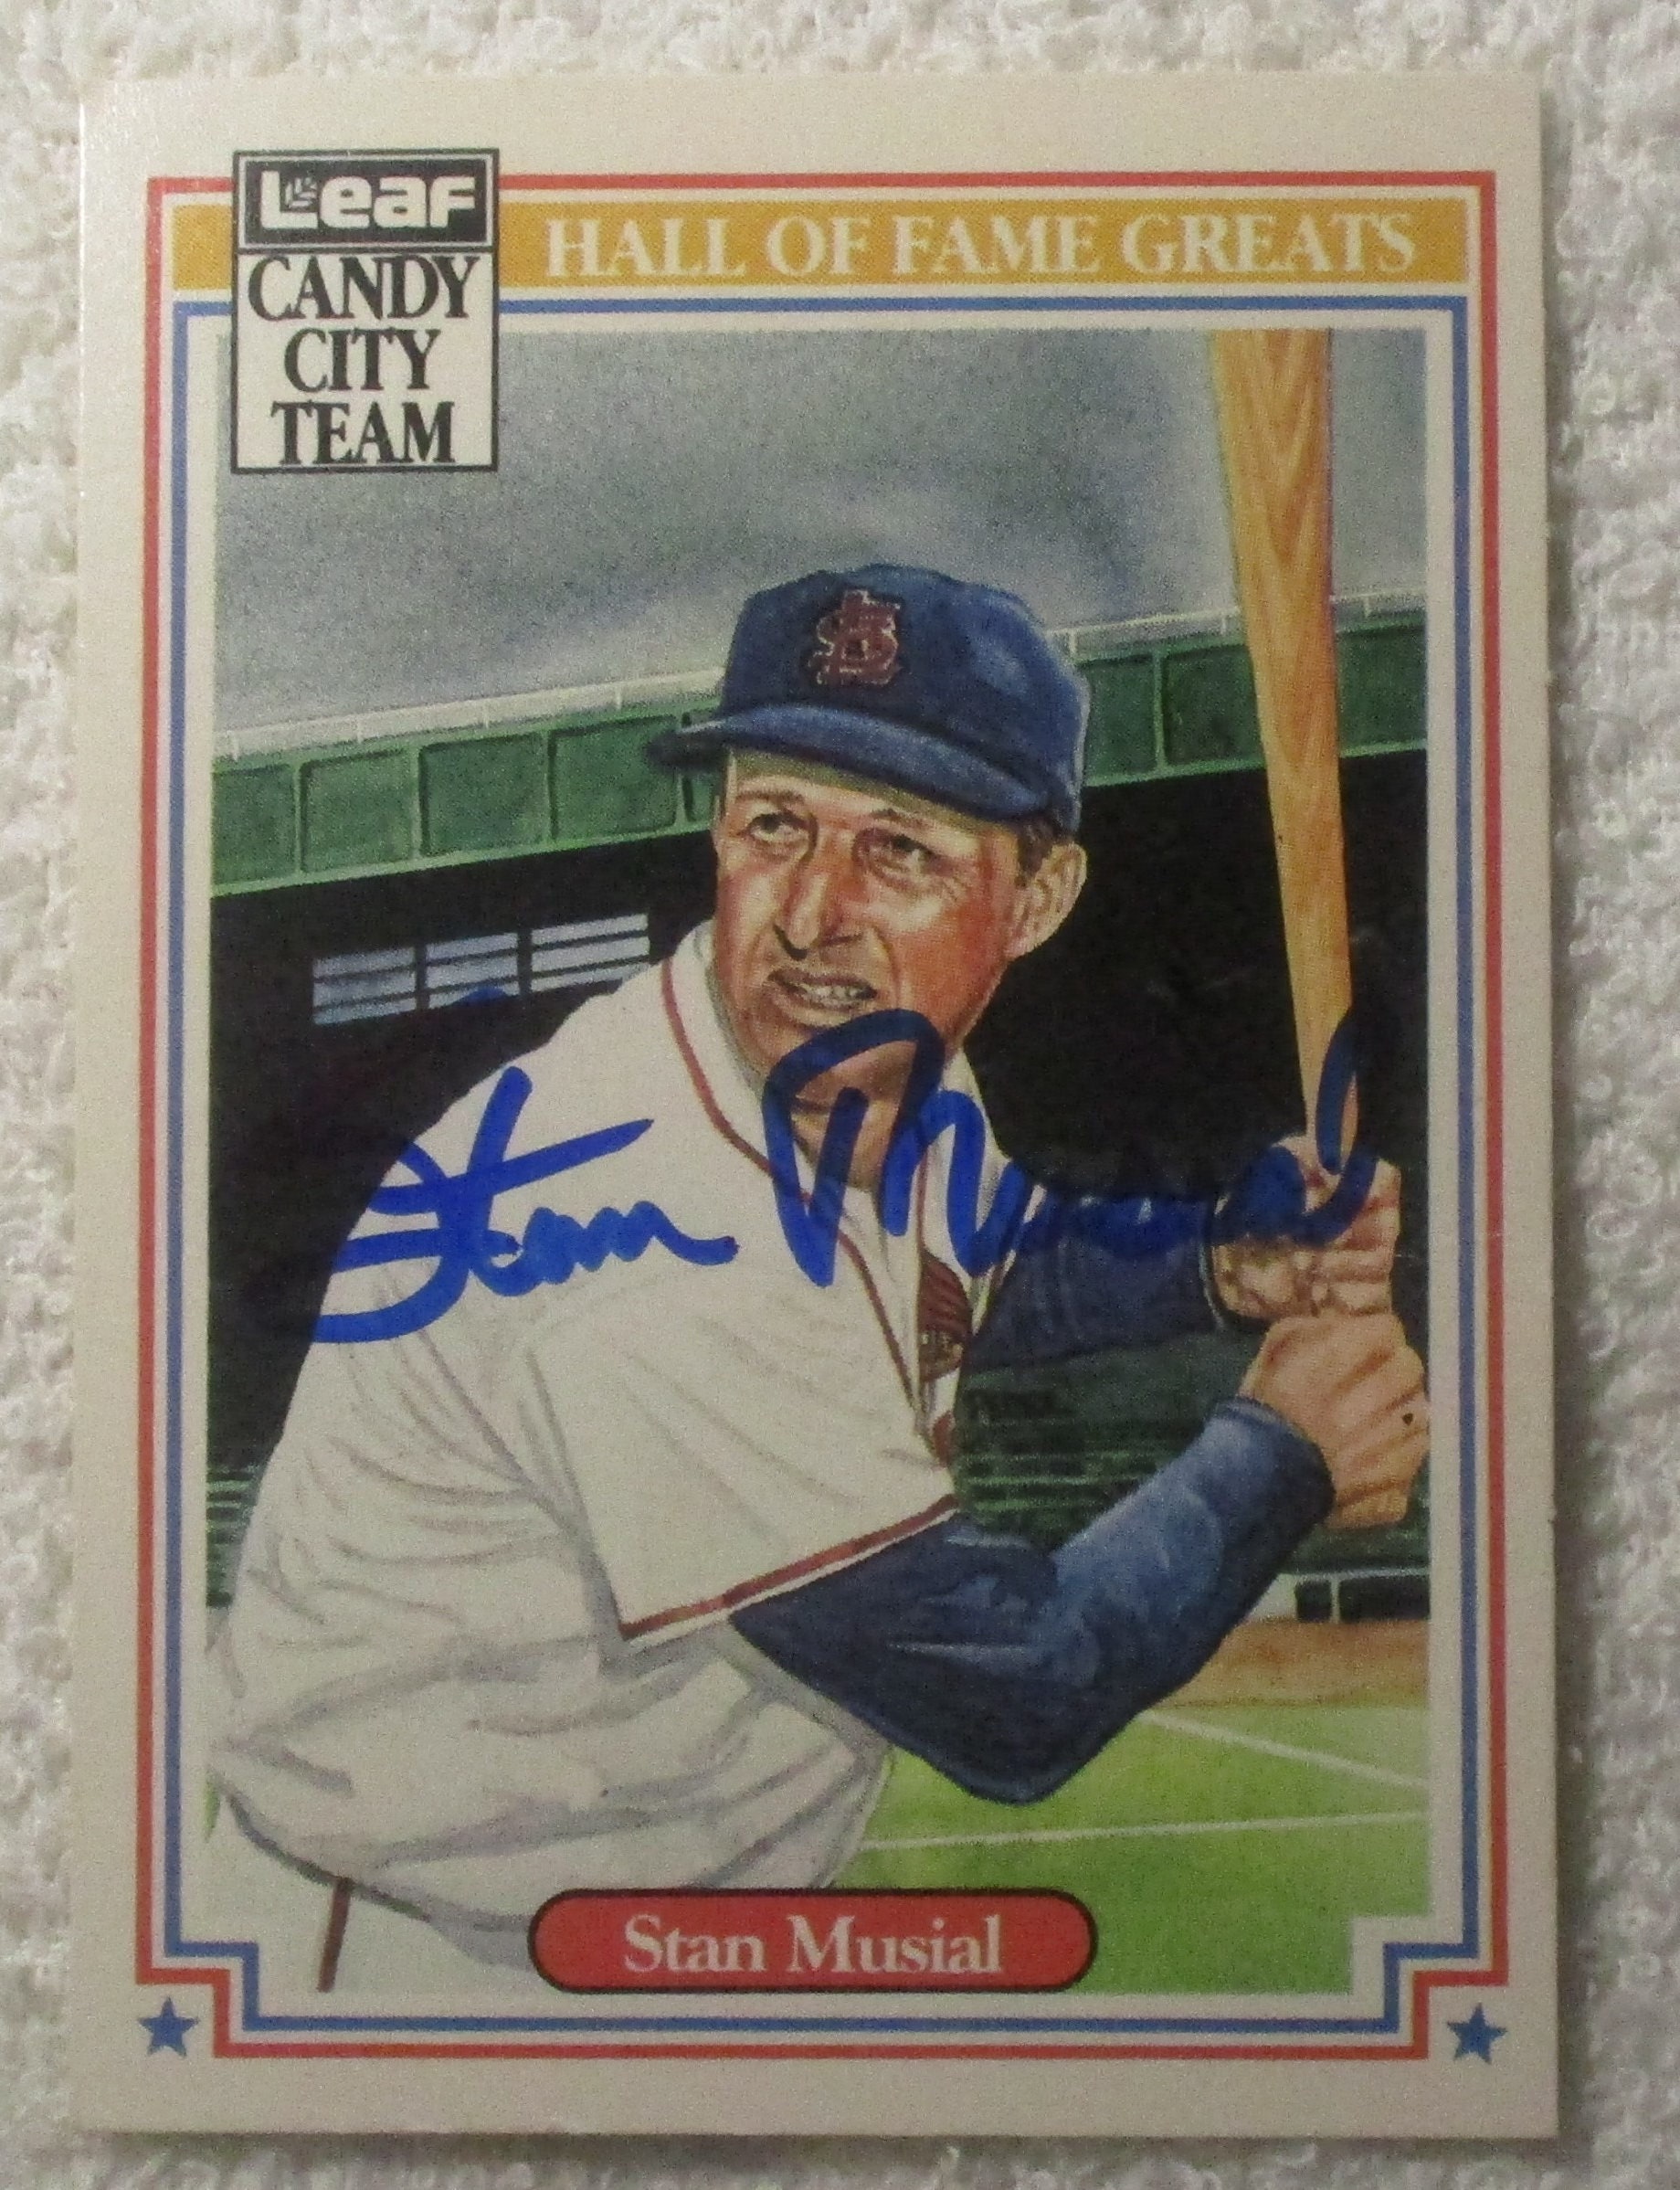 Stan Musial Hall of Fame Greats Autographed Card Cardinals No 